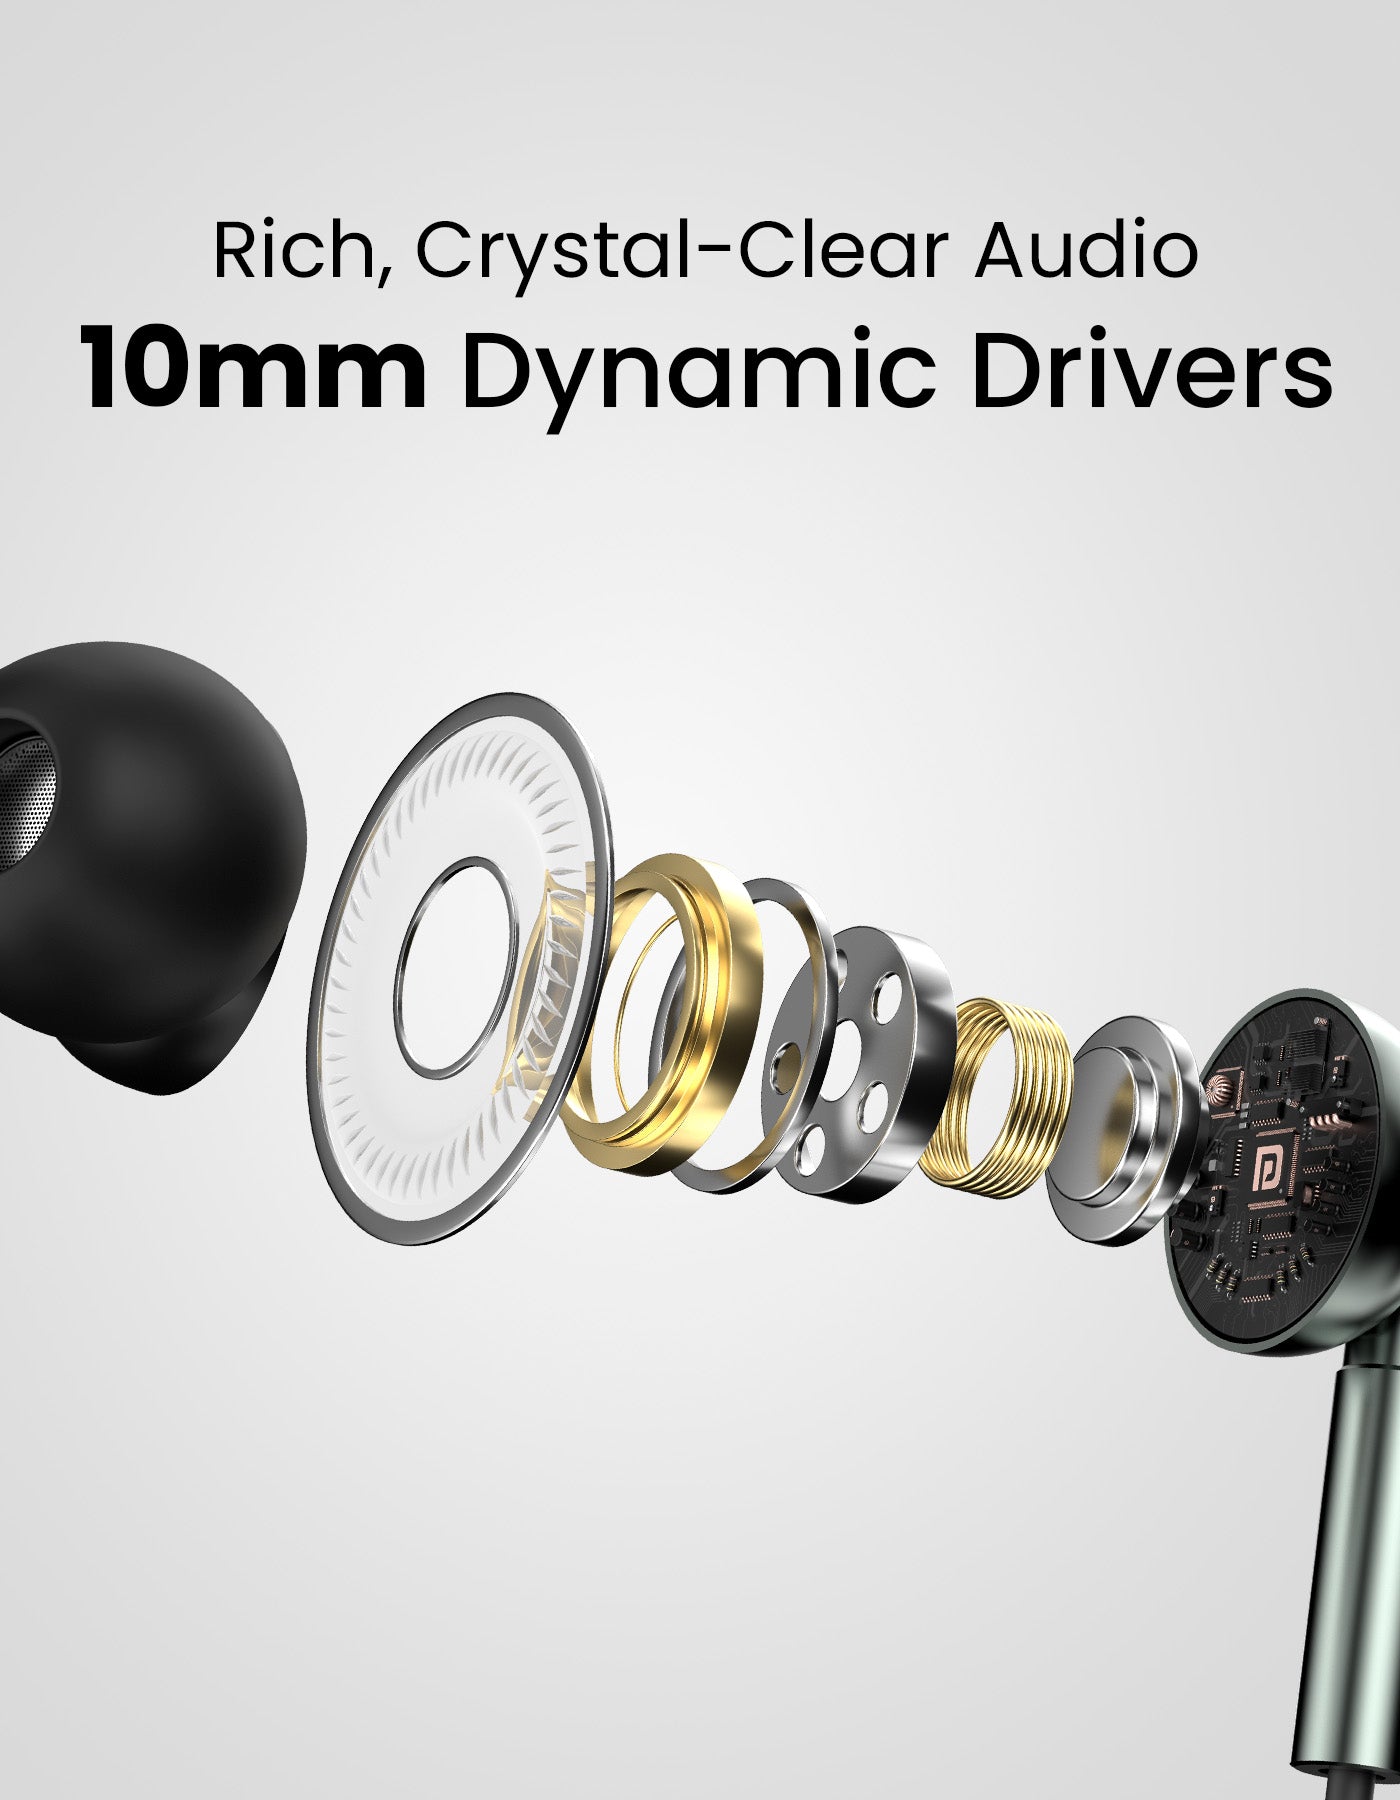 Sleek, comfortable, and stylish earbuds for hours of uninterrupted listening pleasure